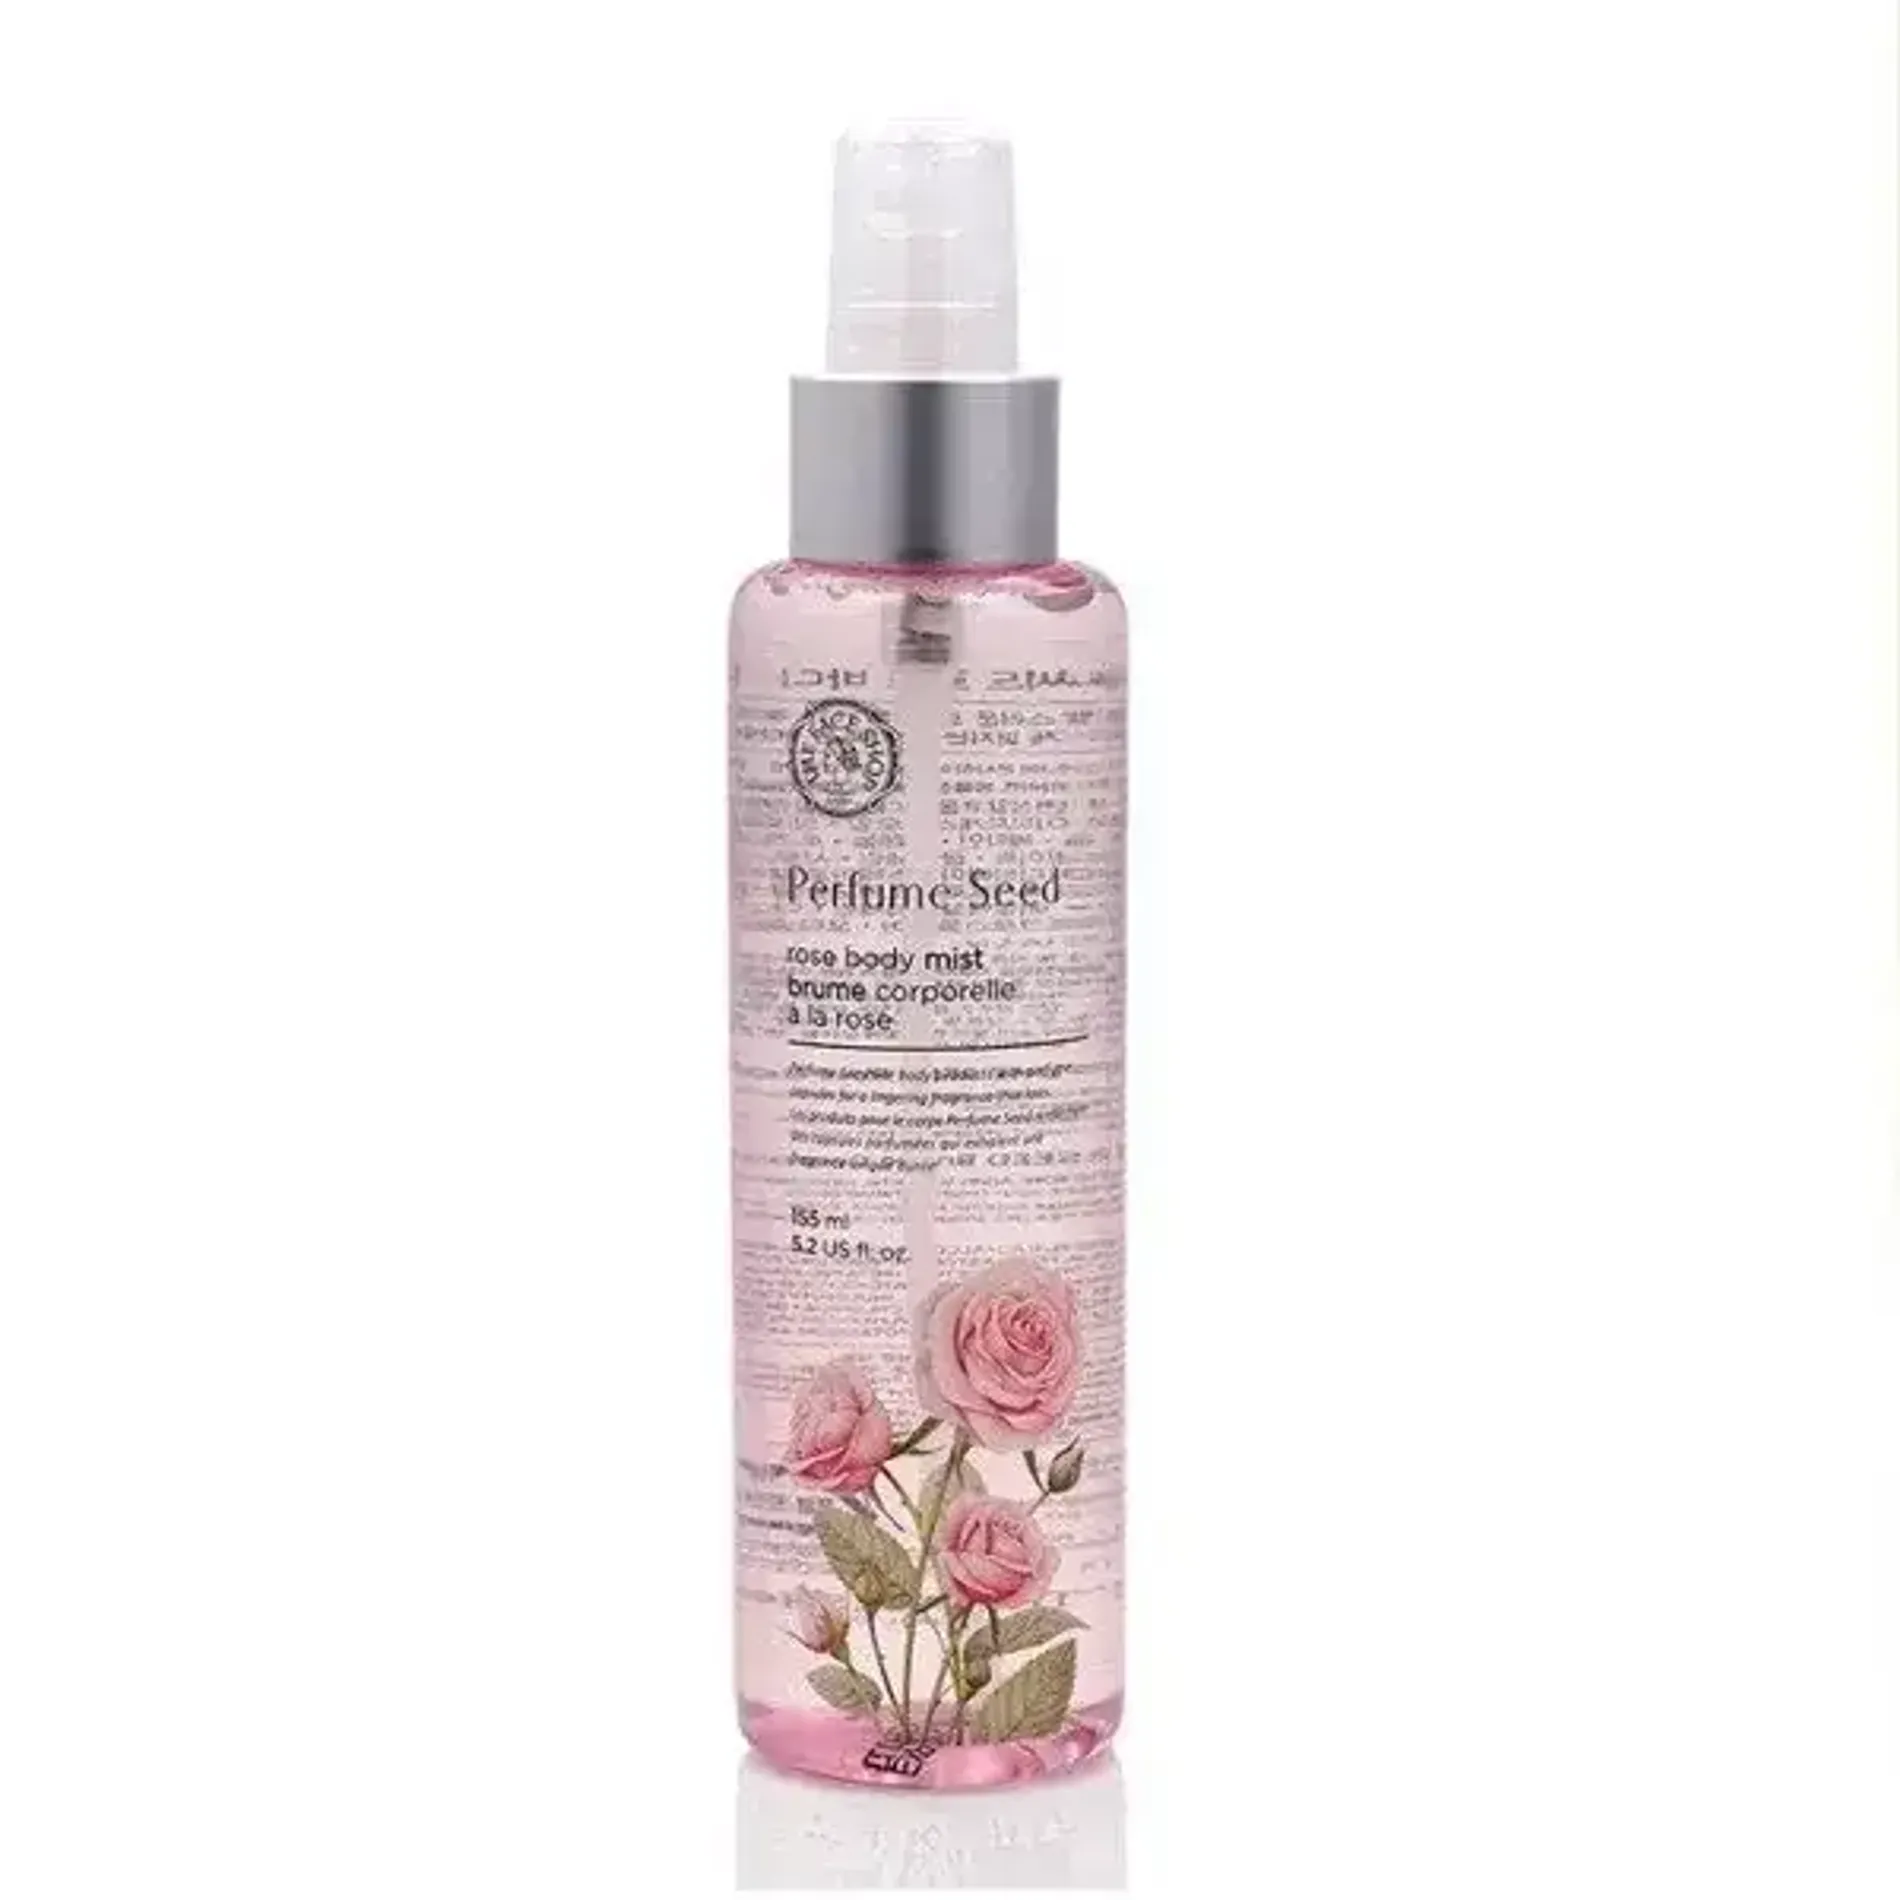 xit-duong-the-huong-nuoc-hoa-thefaceshop-perfume-seed-rose-body-mist-155ml-1